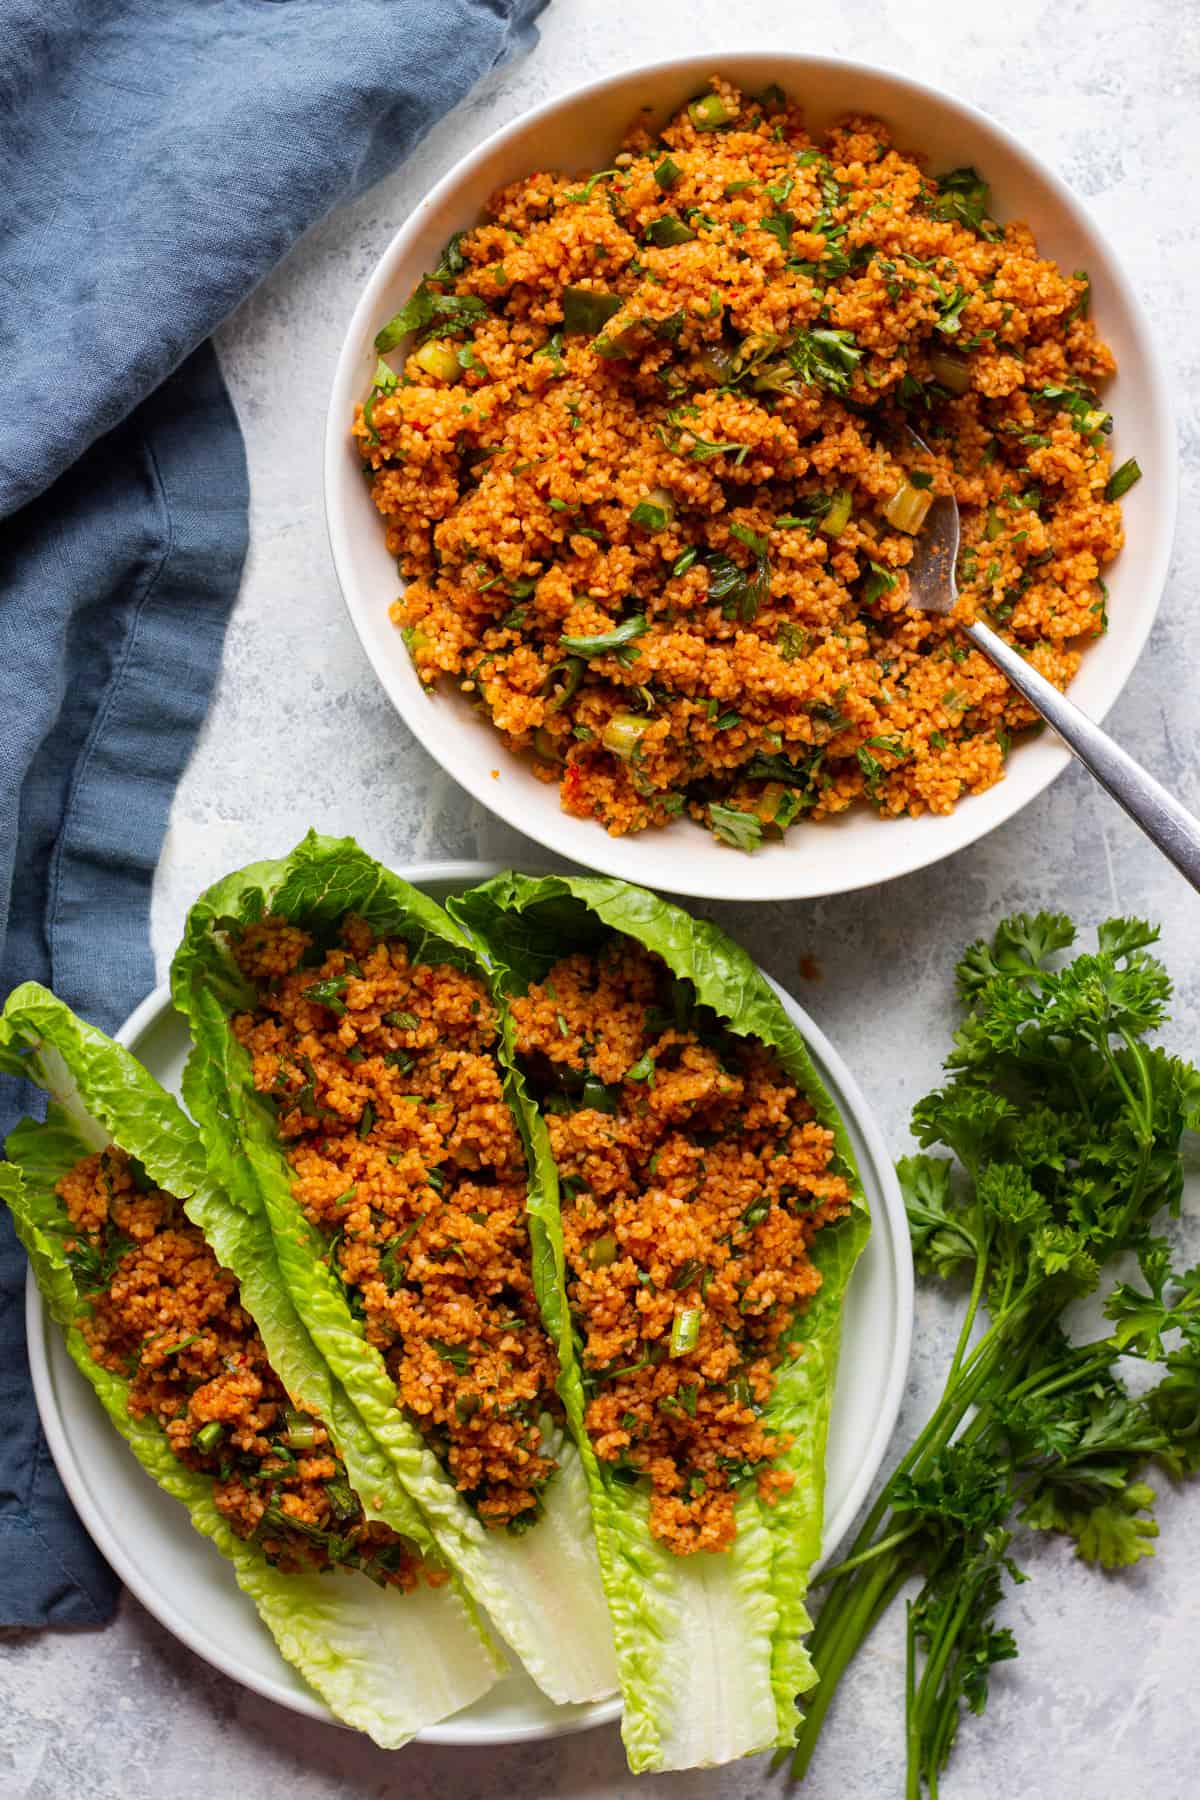 An easy bulgur salad recipe that's made with bulgur wheat, herbs and olive oil. This Turkish bulgur salad is a great addition to any table. 